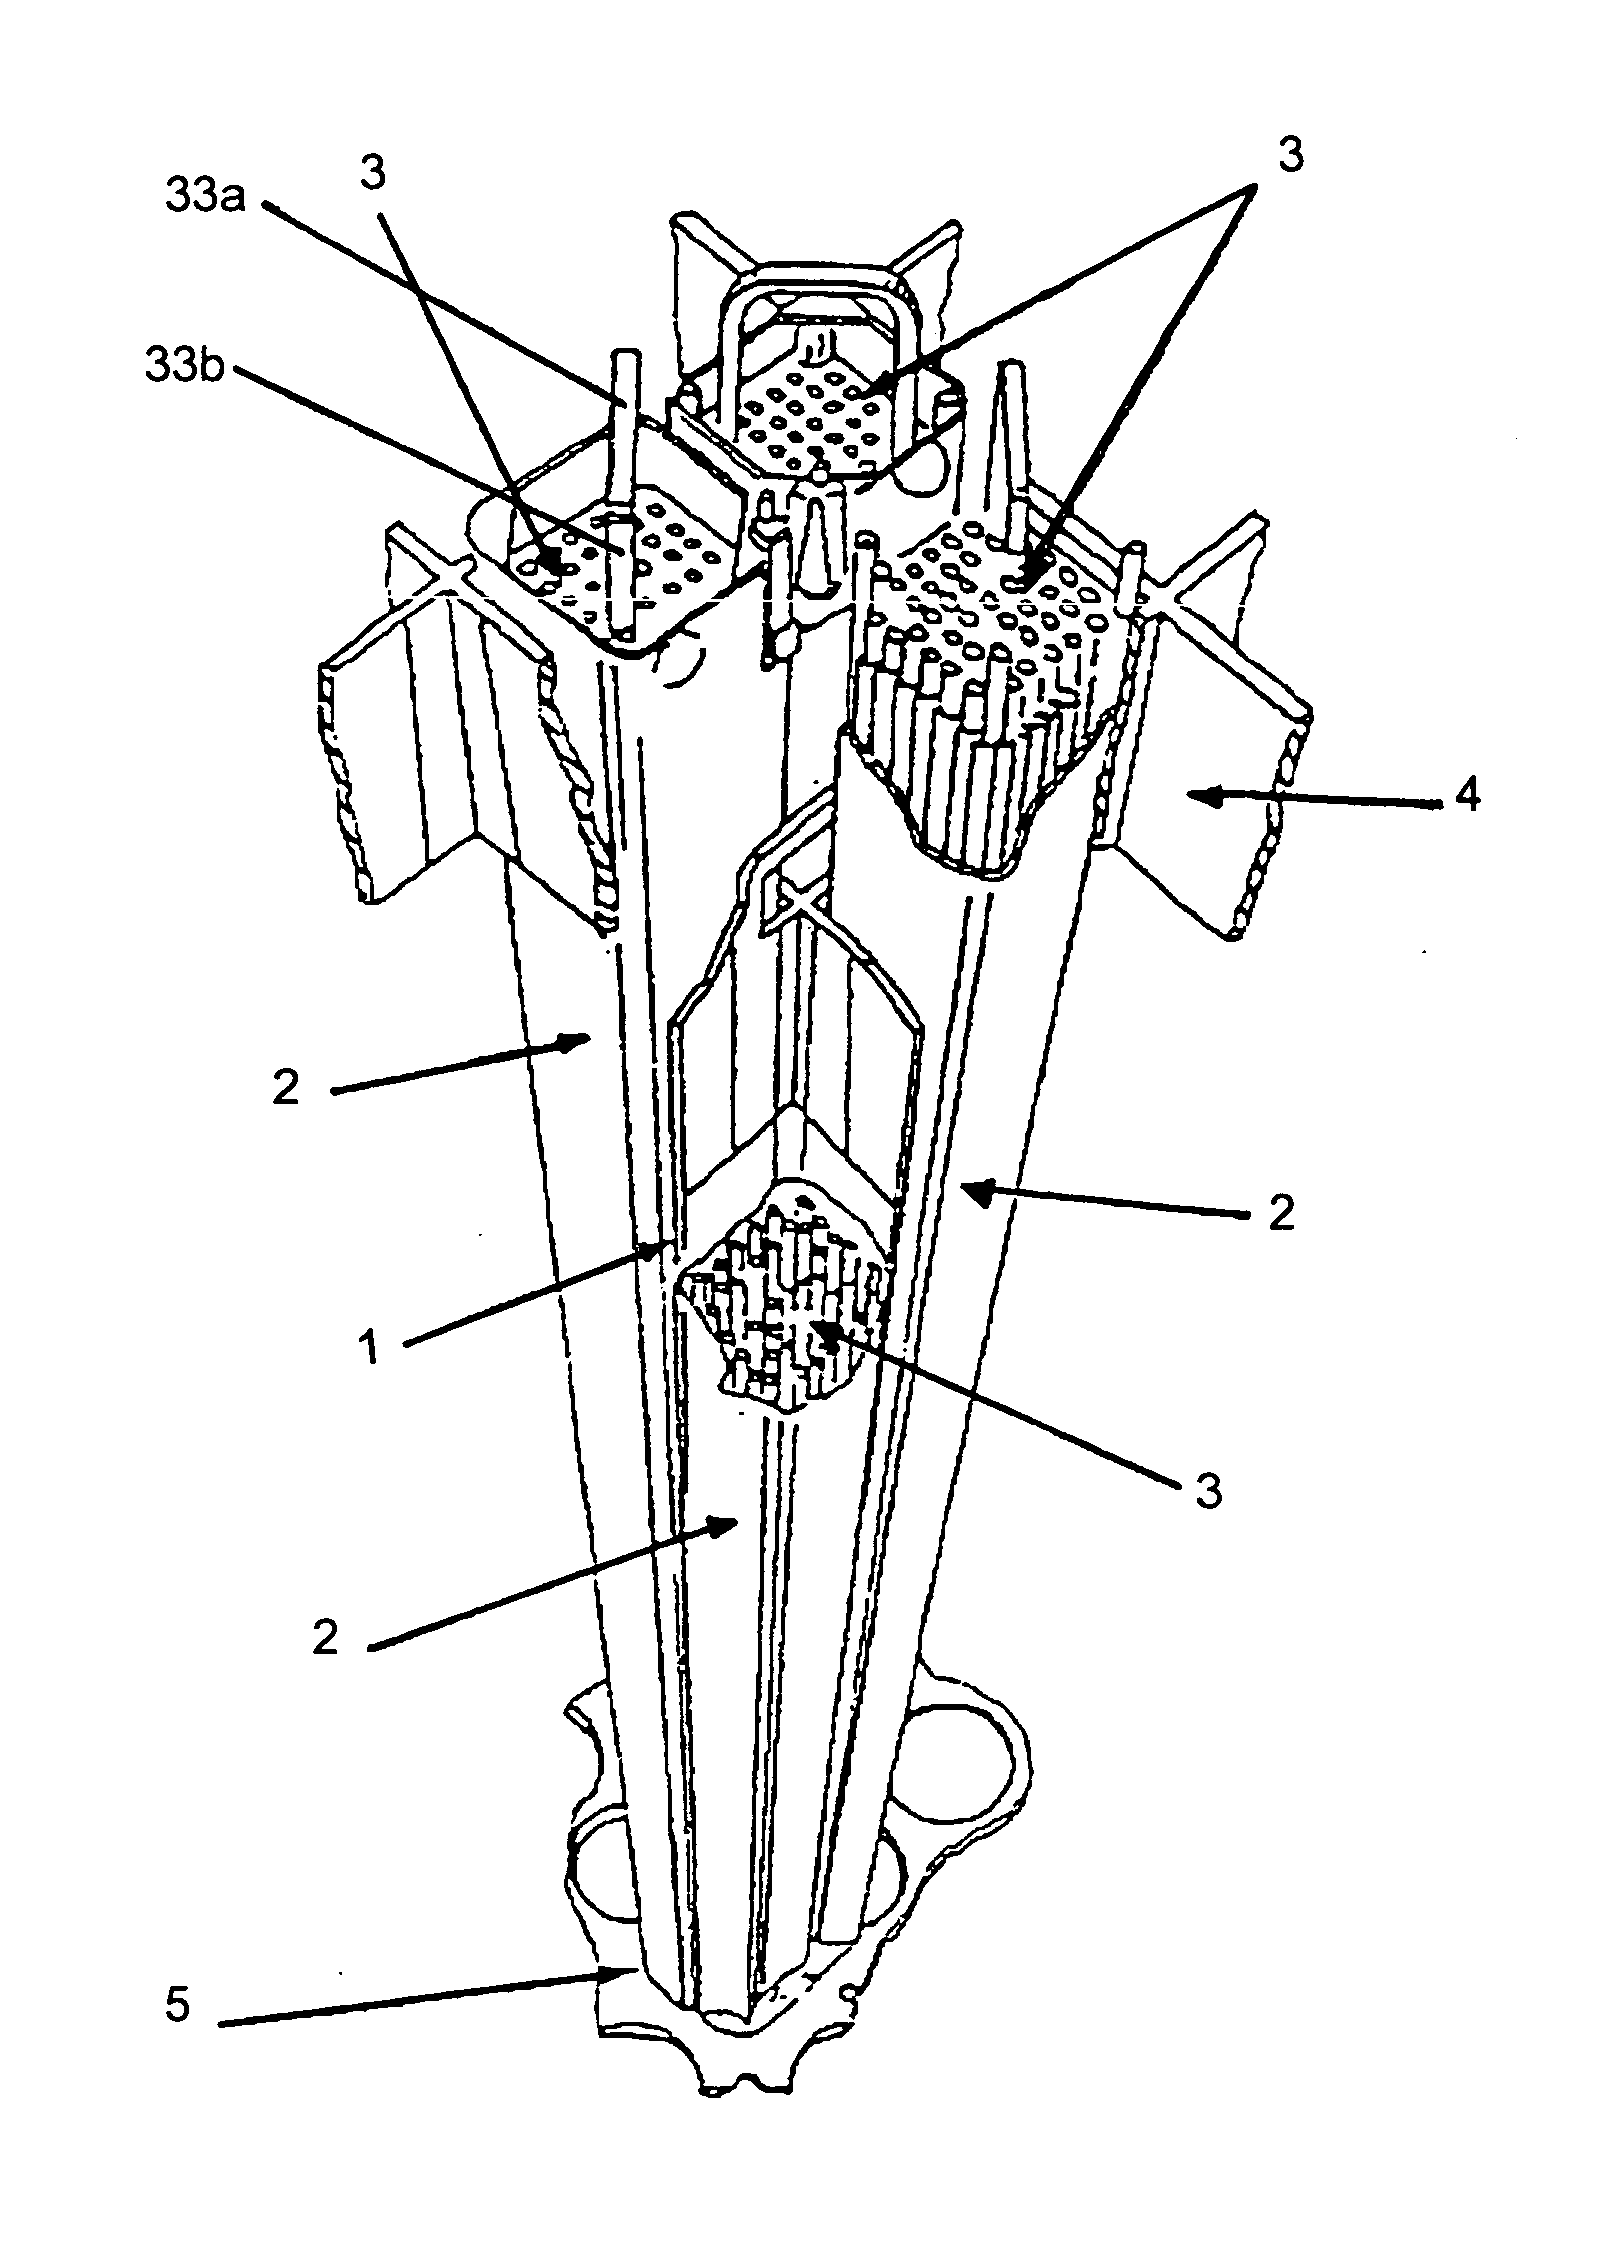 Control element for a nuclear reactor